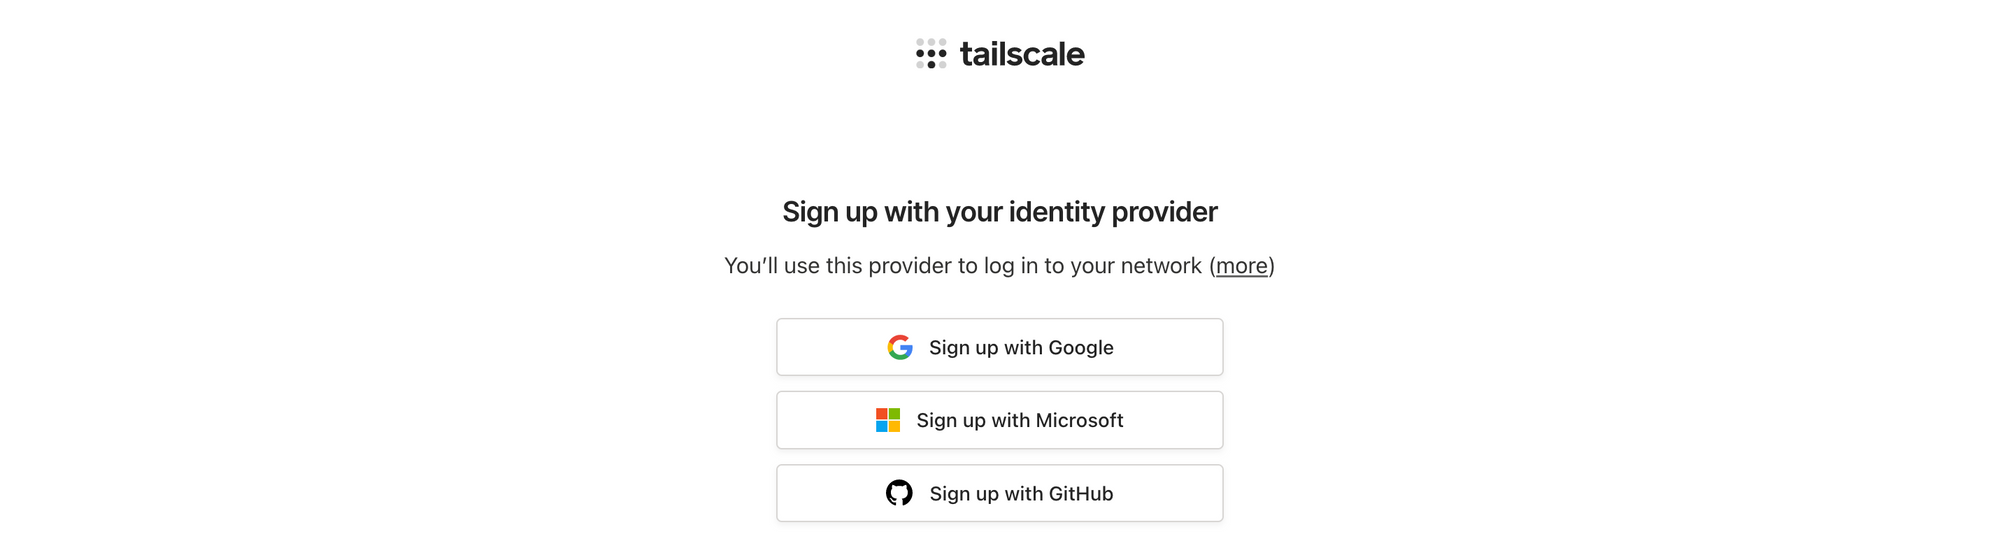 Sign up for Tailscale with an identity provider